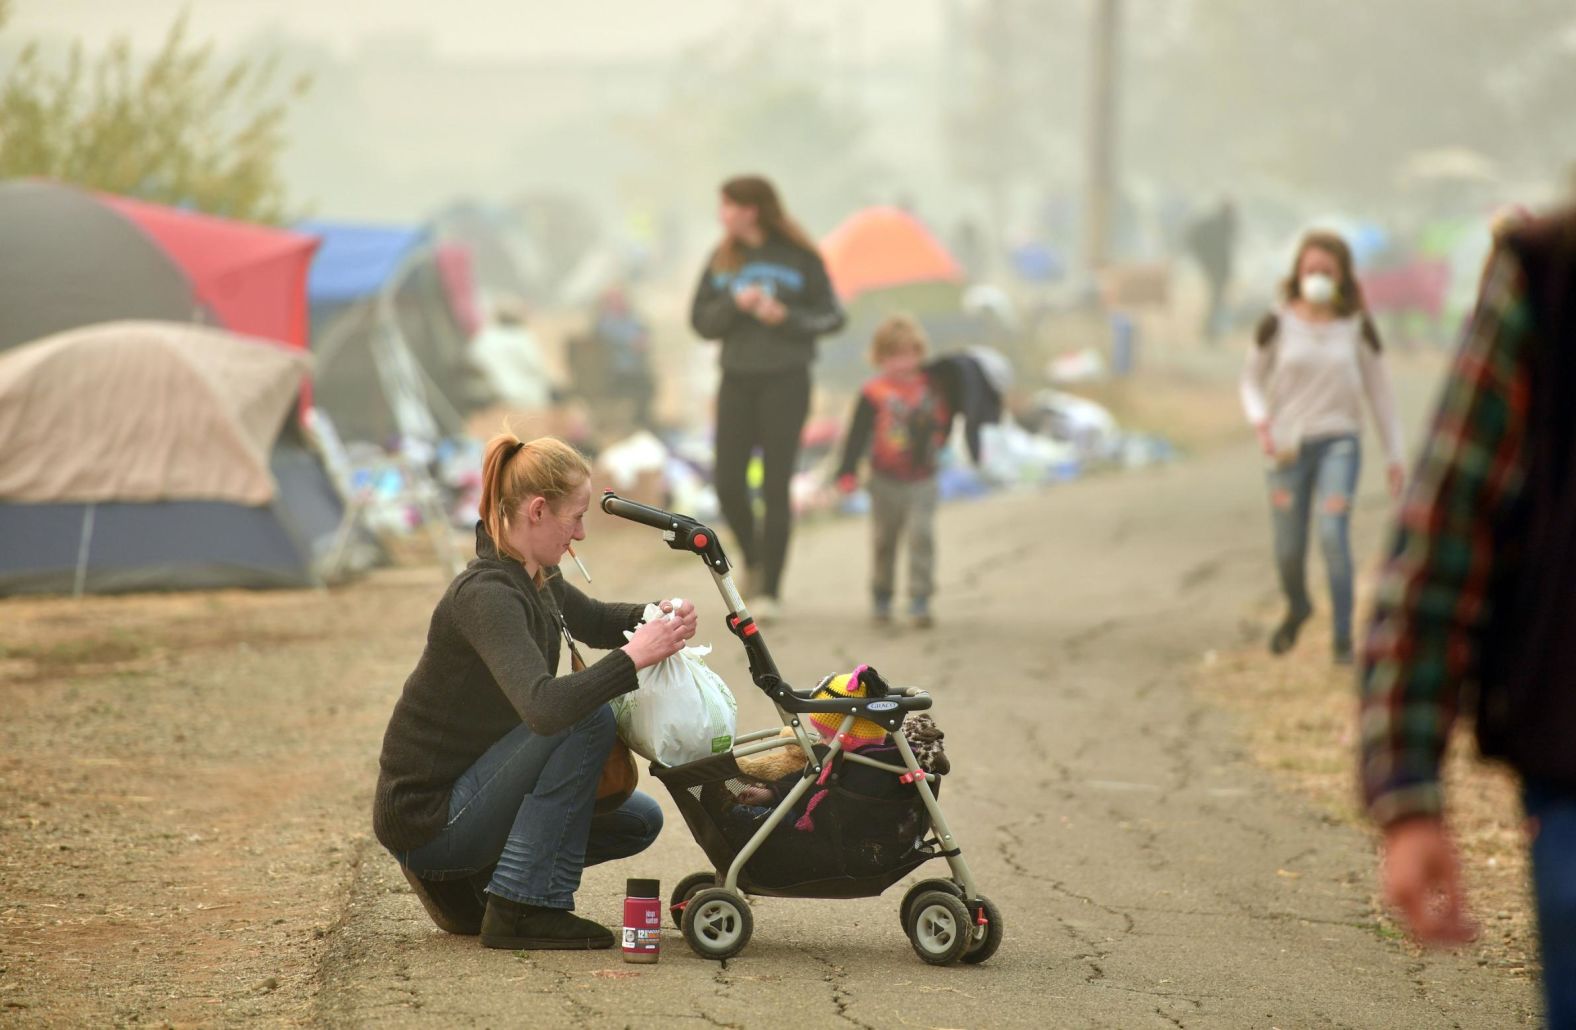 Ashley Sheppard, whose house burned down, tends to her baby on November 15.